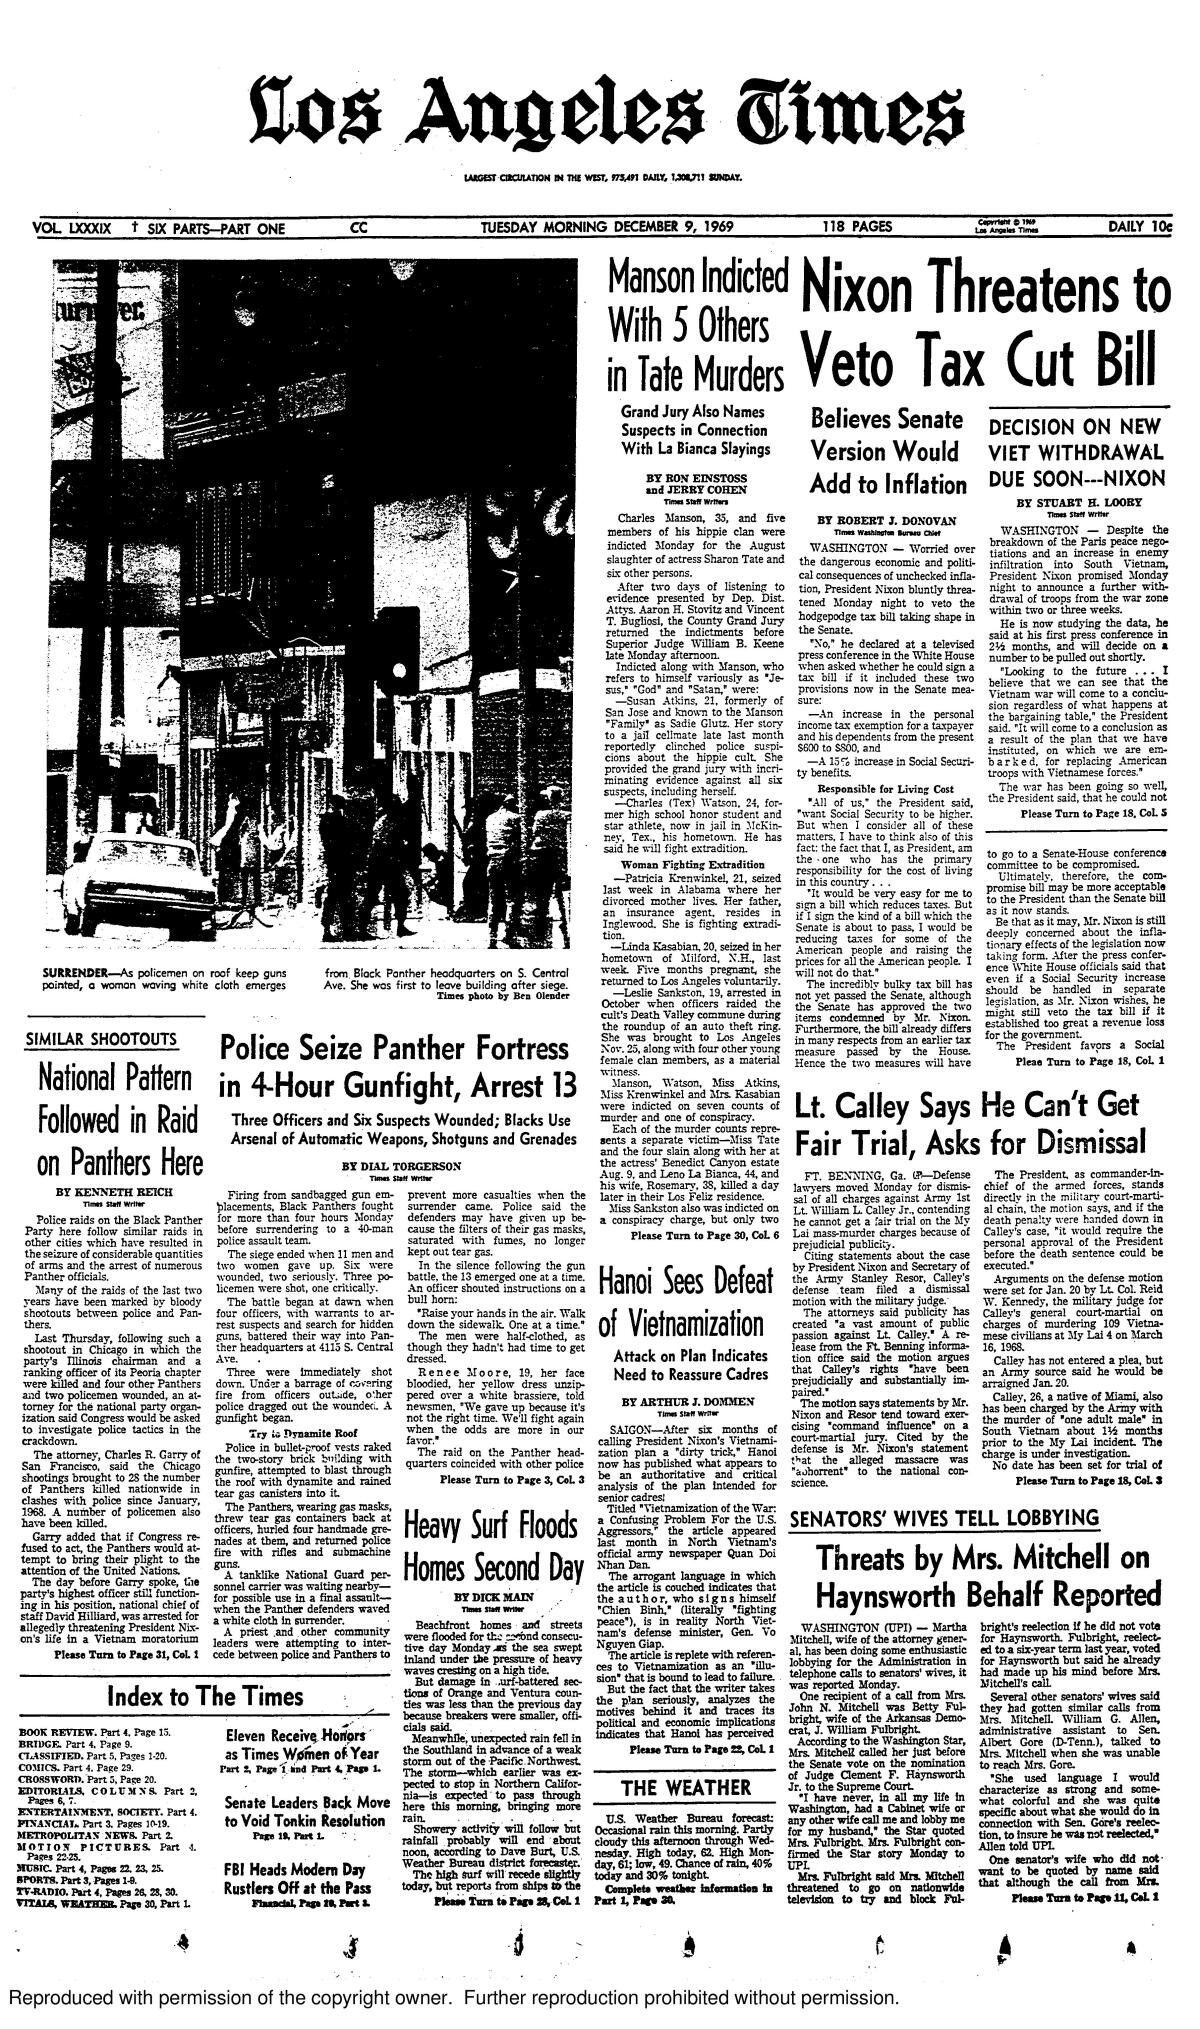 The front page of the Los Angeles Times on Dec. 9, 1969